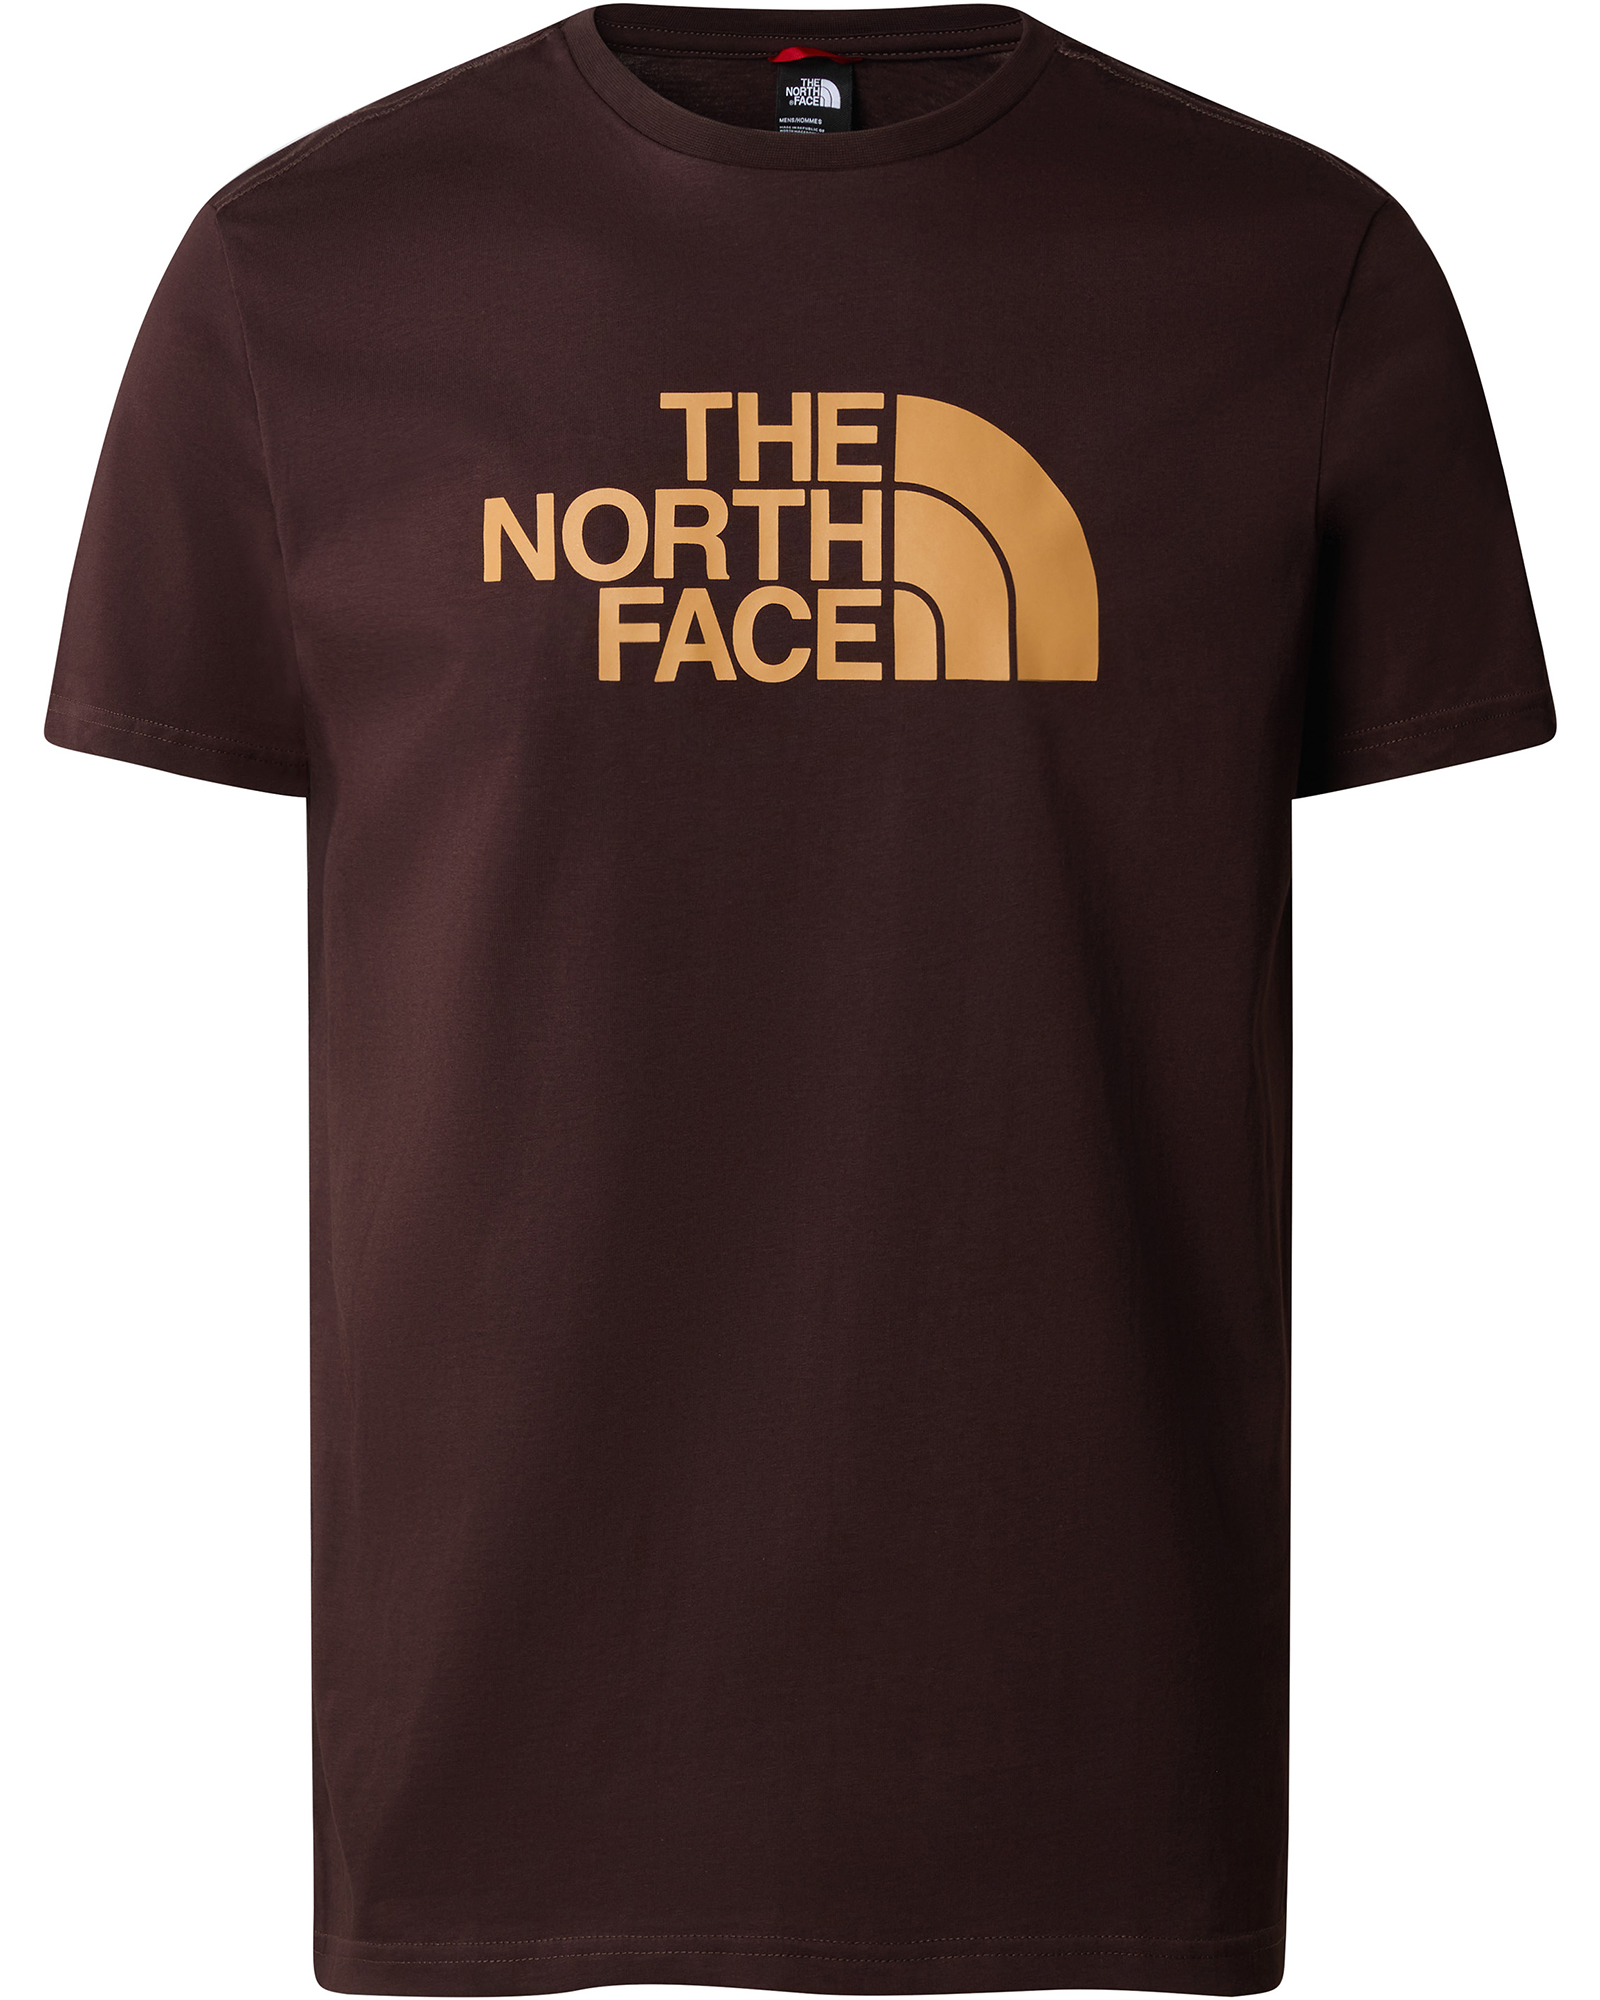 The North Face Easy Men’s T Shirt - Coal Brown-Almond Butter L